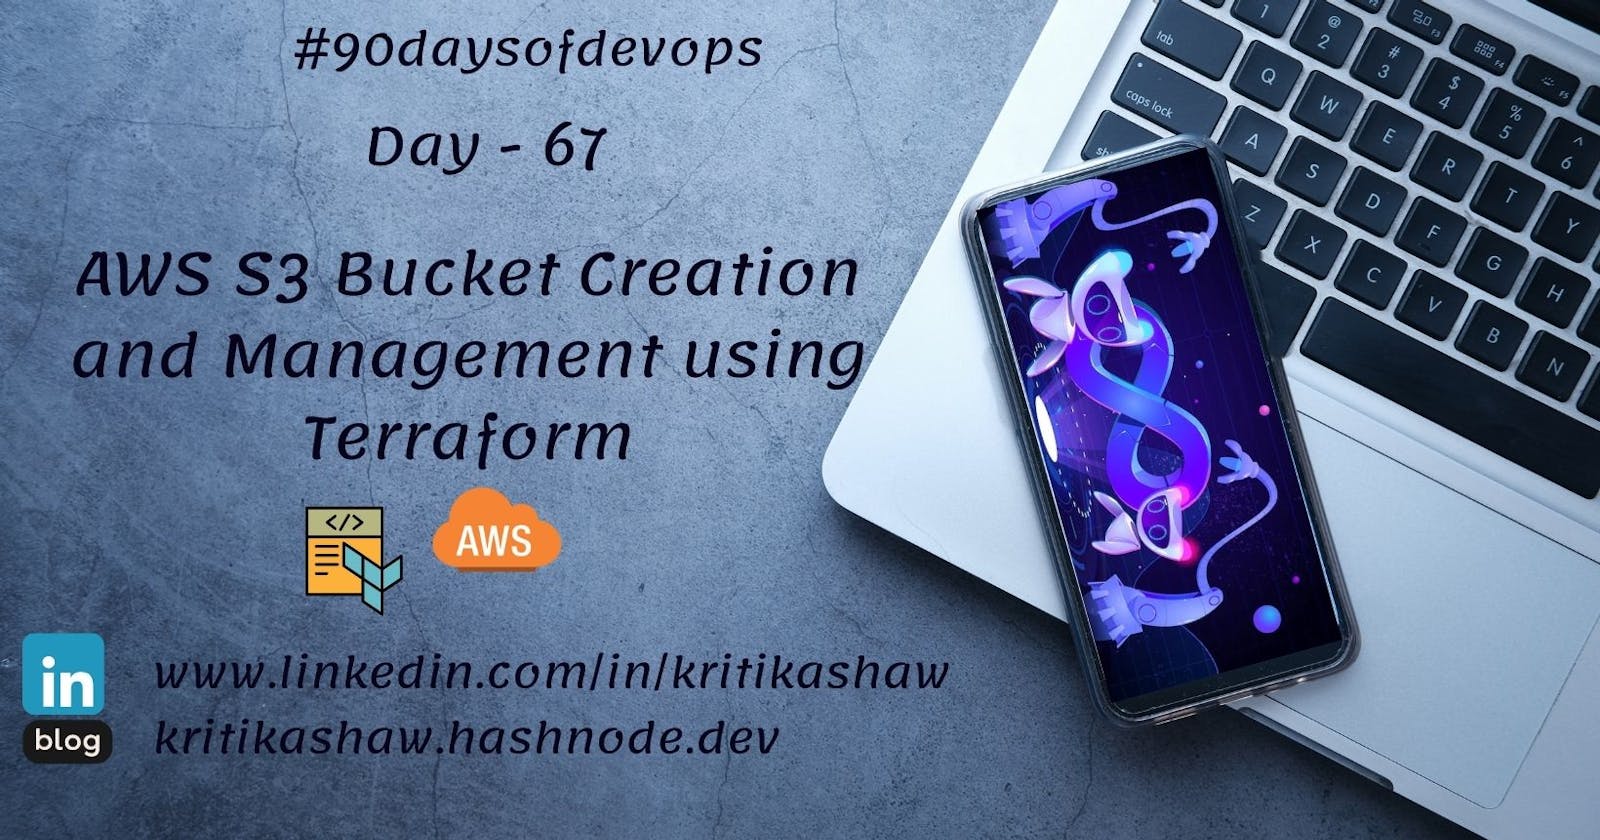 Day 67 AWS S3 Bucket Creation and Management using Terraform